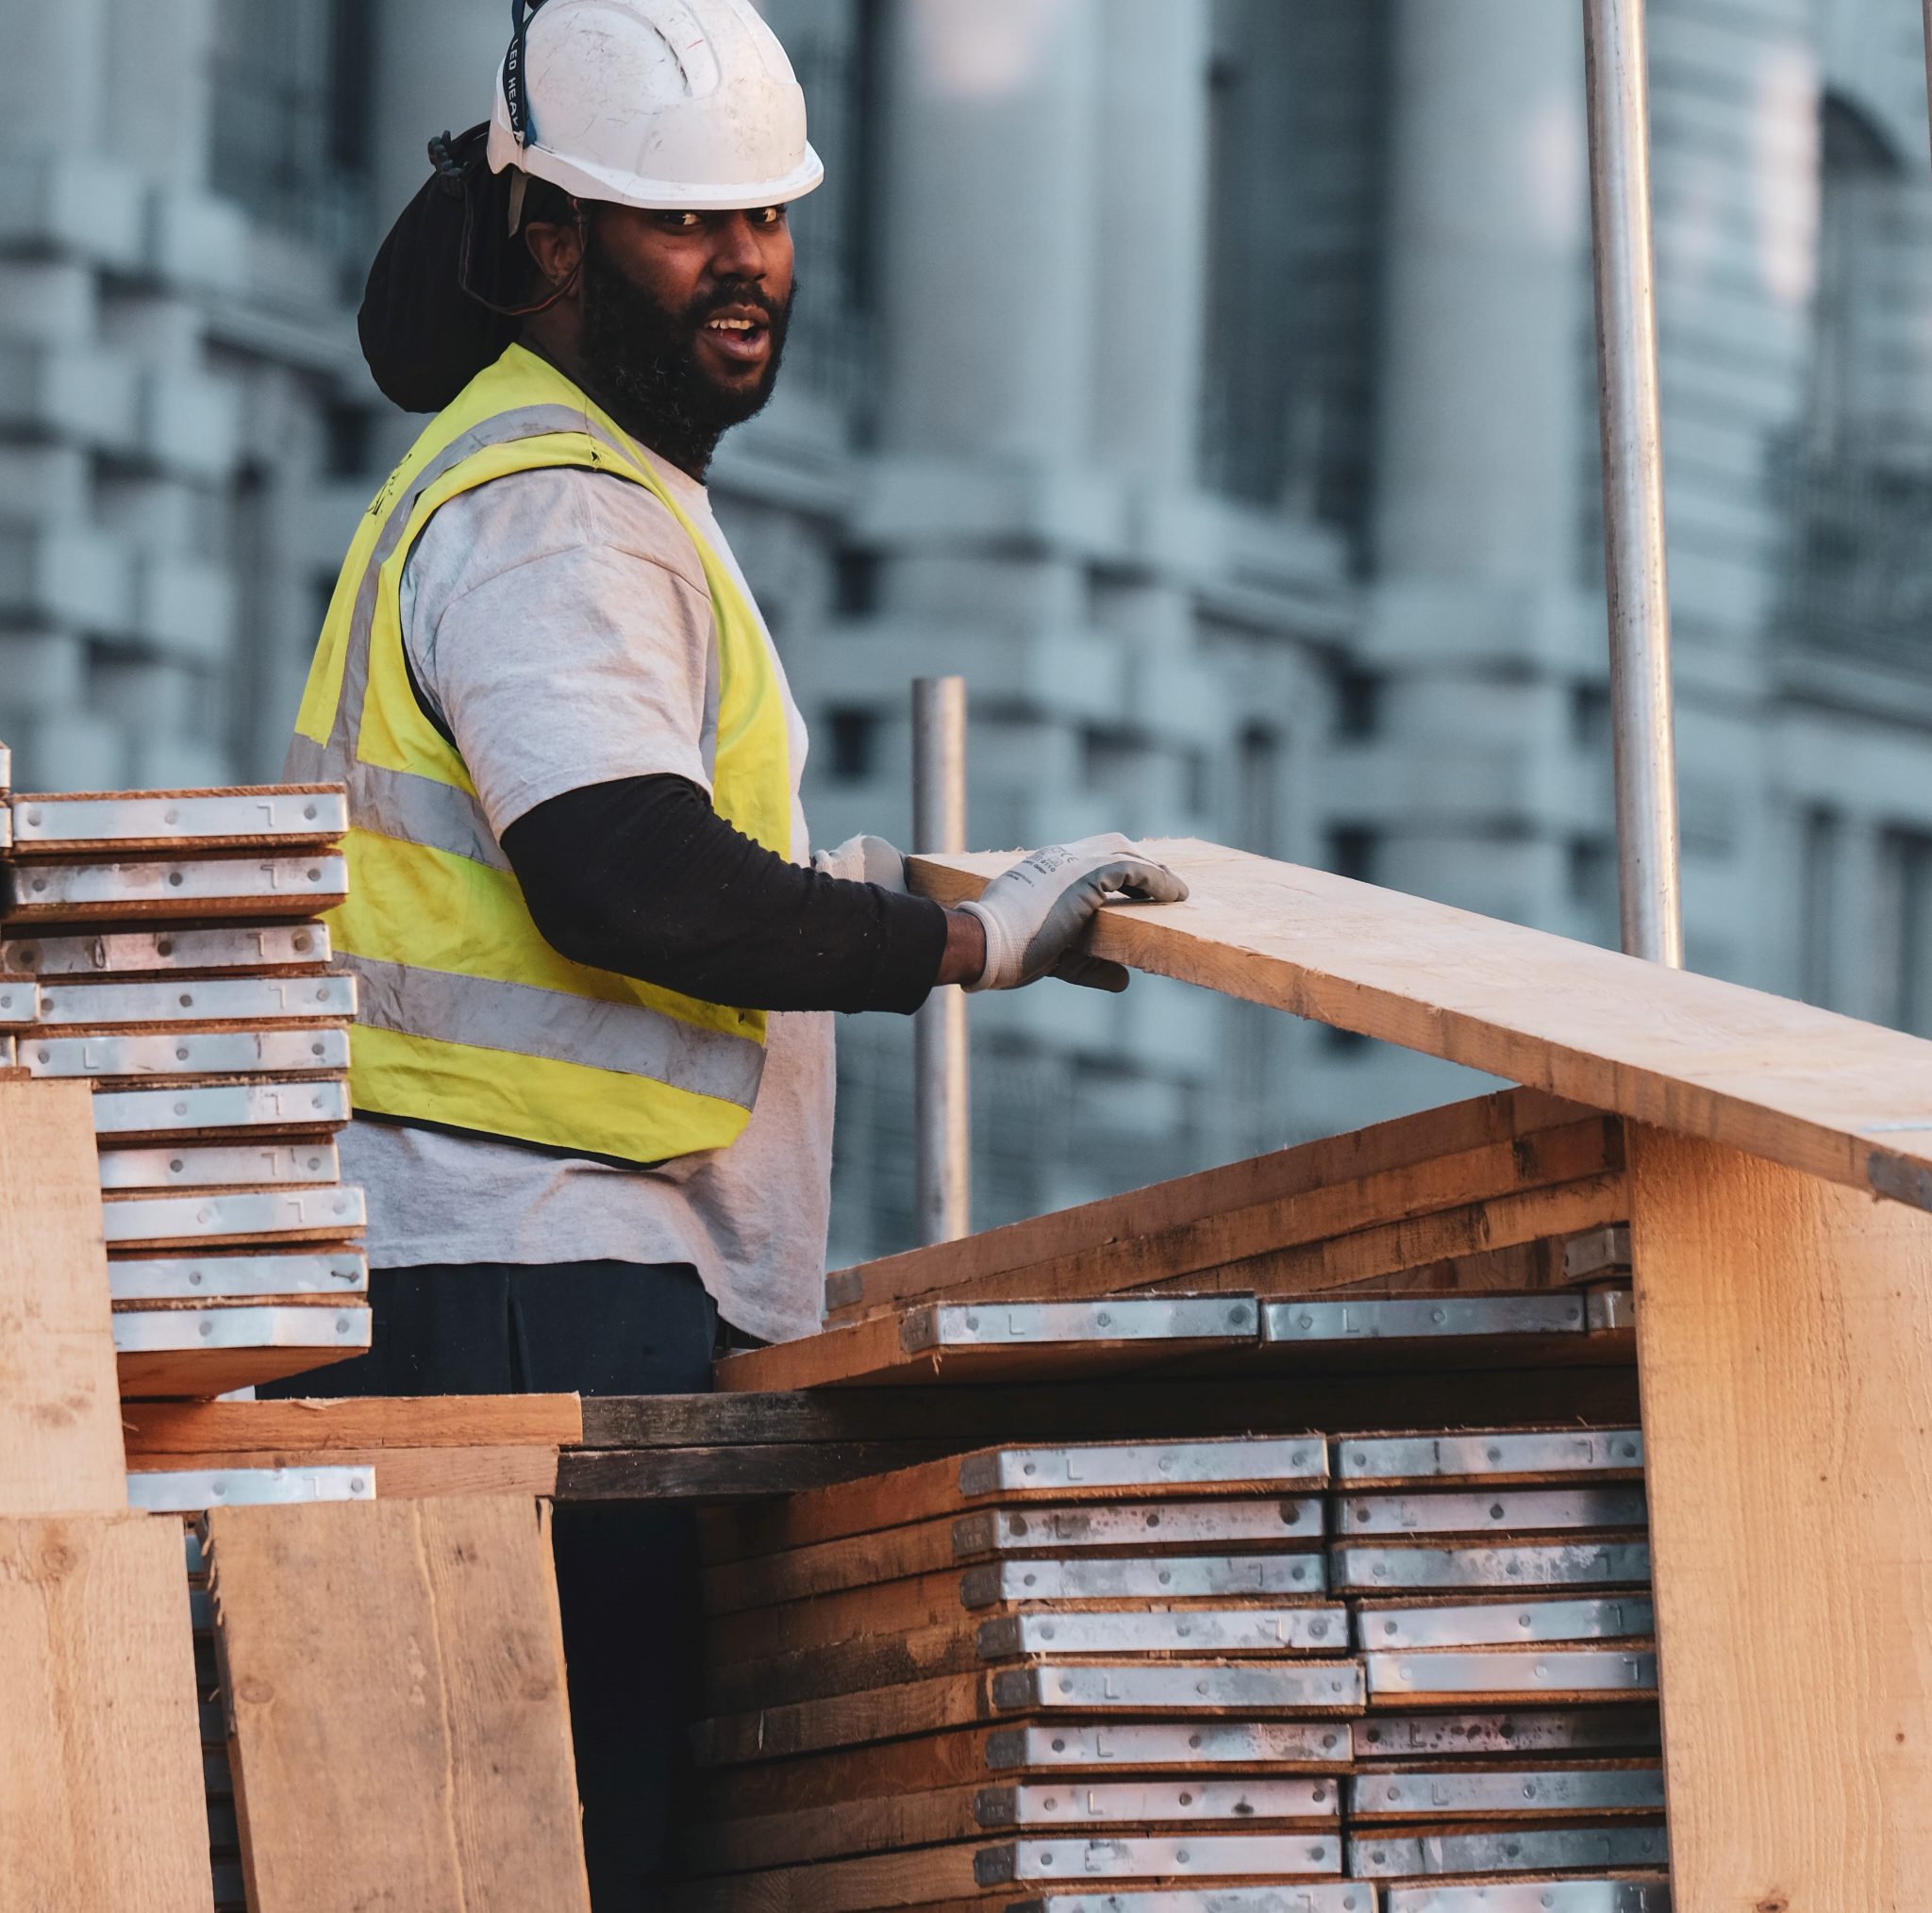 Jobs related to building construction